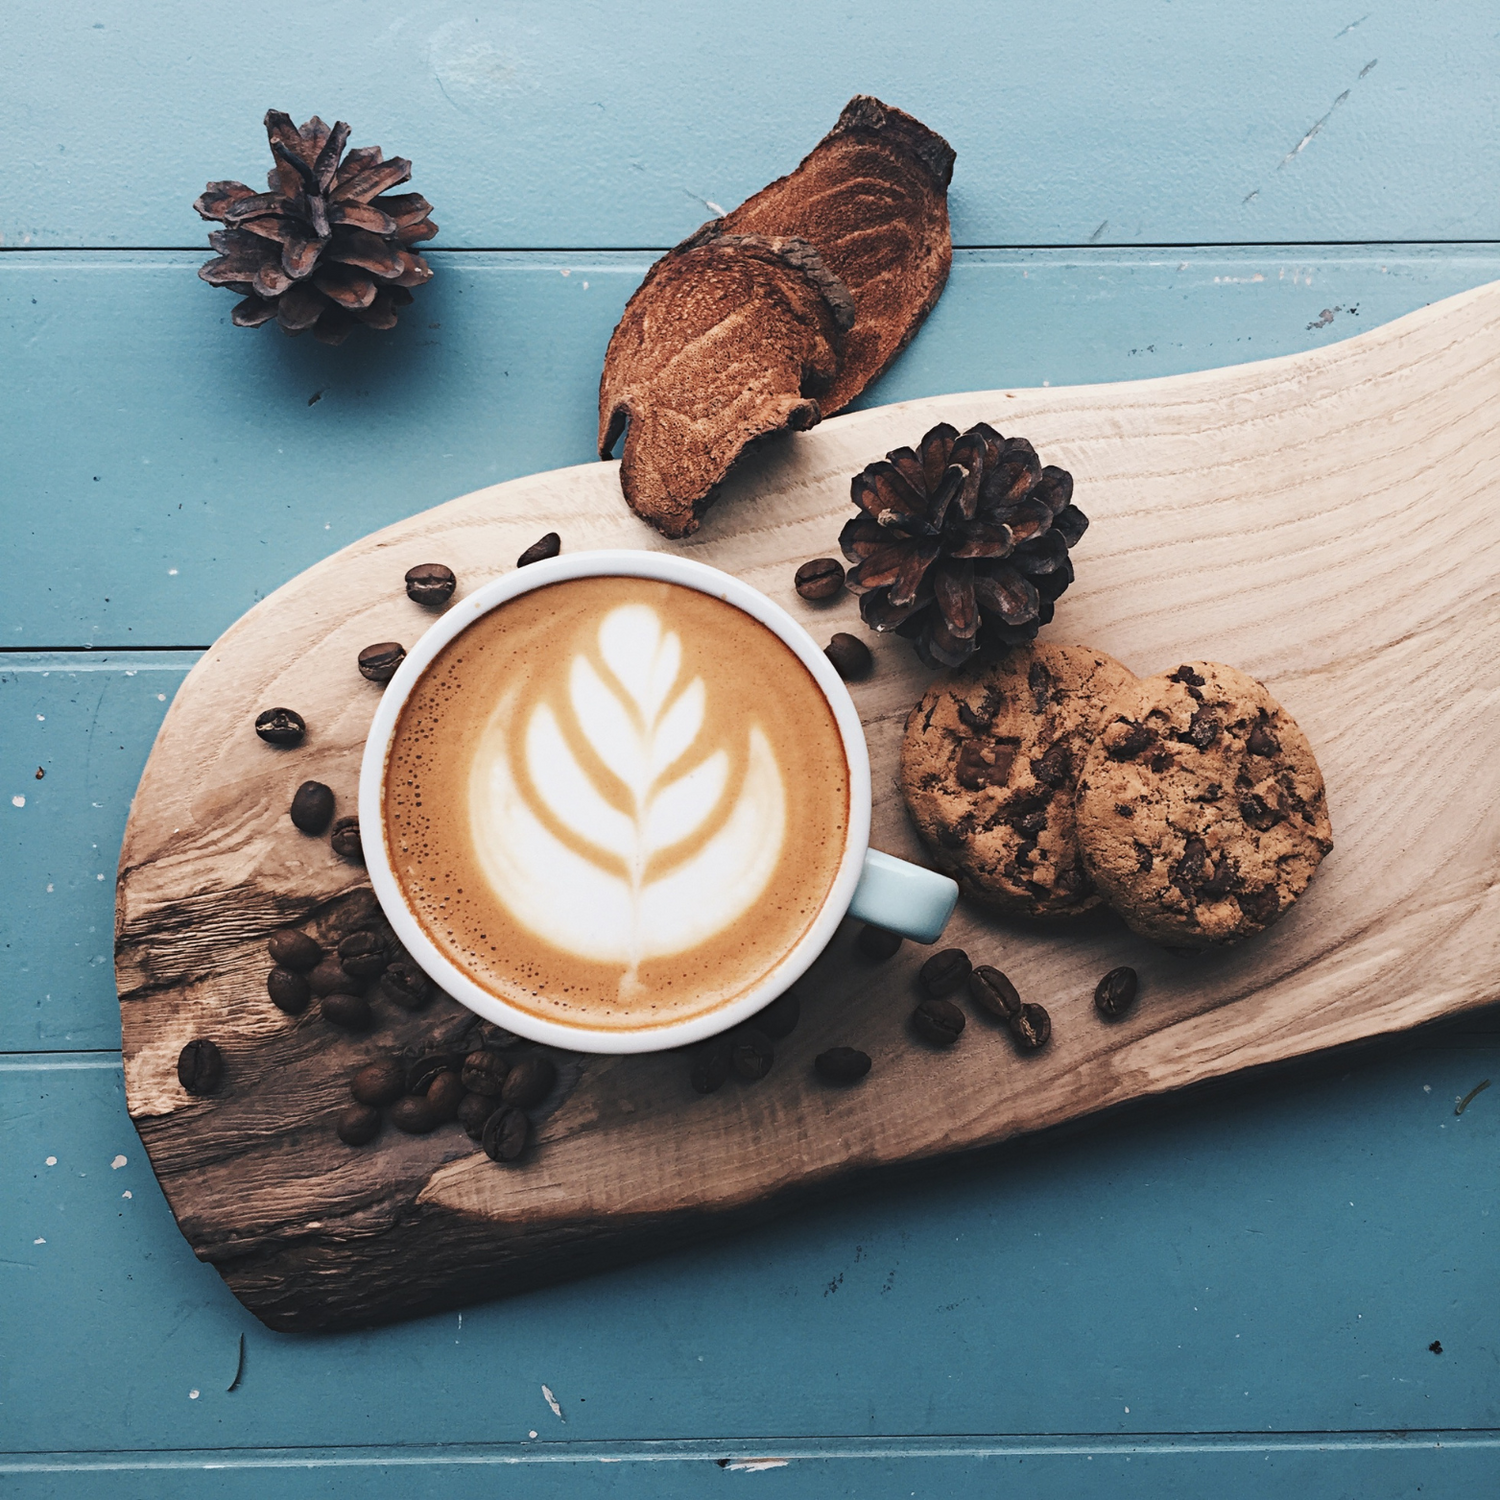 A cup of latte with intricate latte art on a wooden tray, accompanied by chocolate chip cookies, coffee beans, and pinecones, creating a cozy and inviting coffee experience.